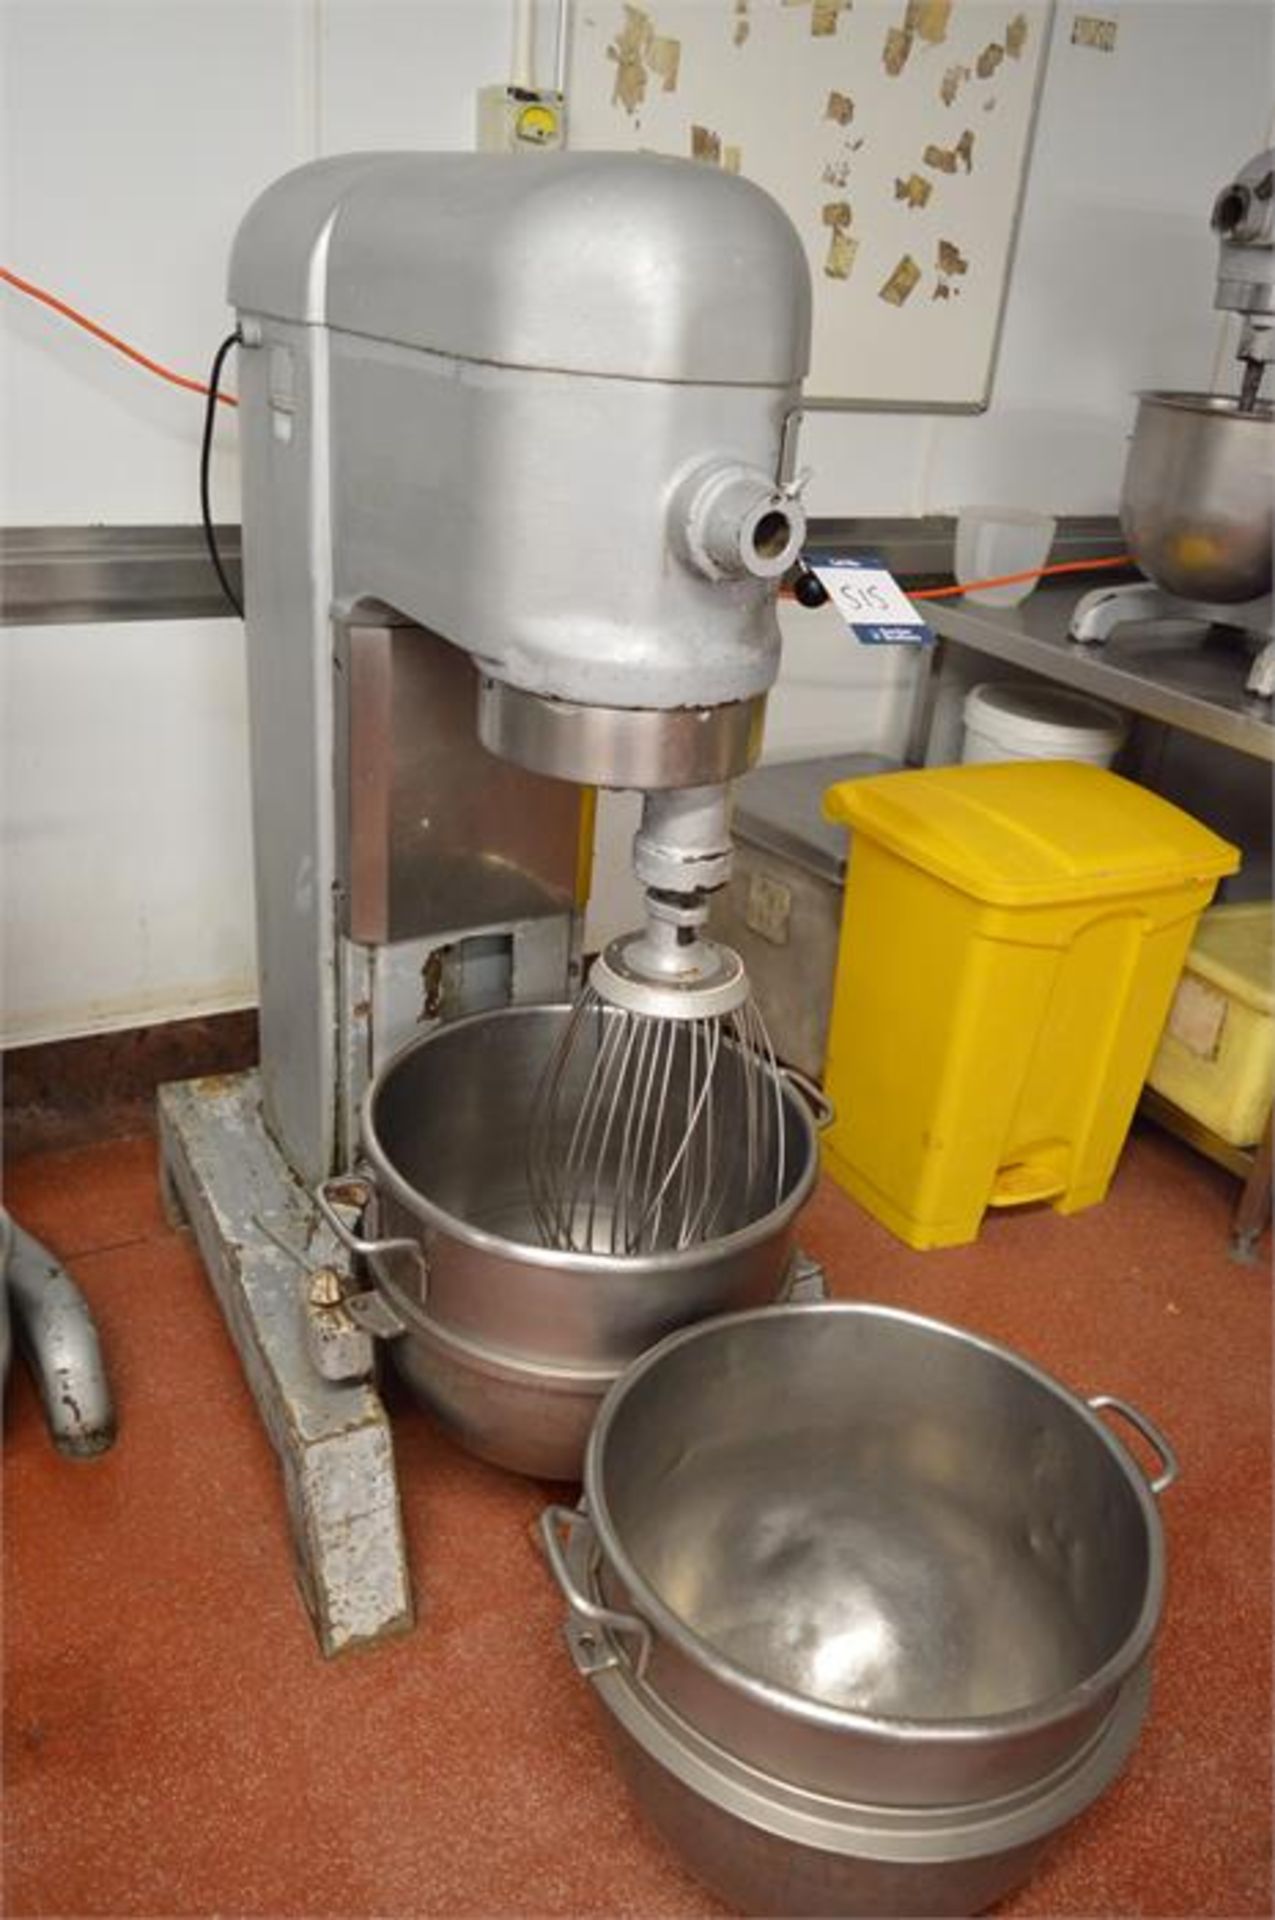 Hobart, Model H600, industrial stand mixer, Serial No. 97.053.245 with two bowls (Located at